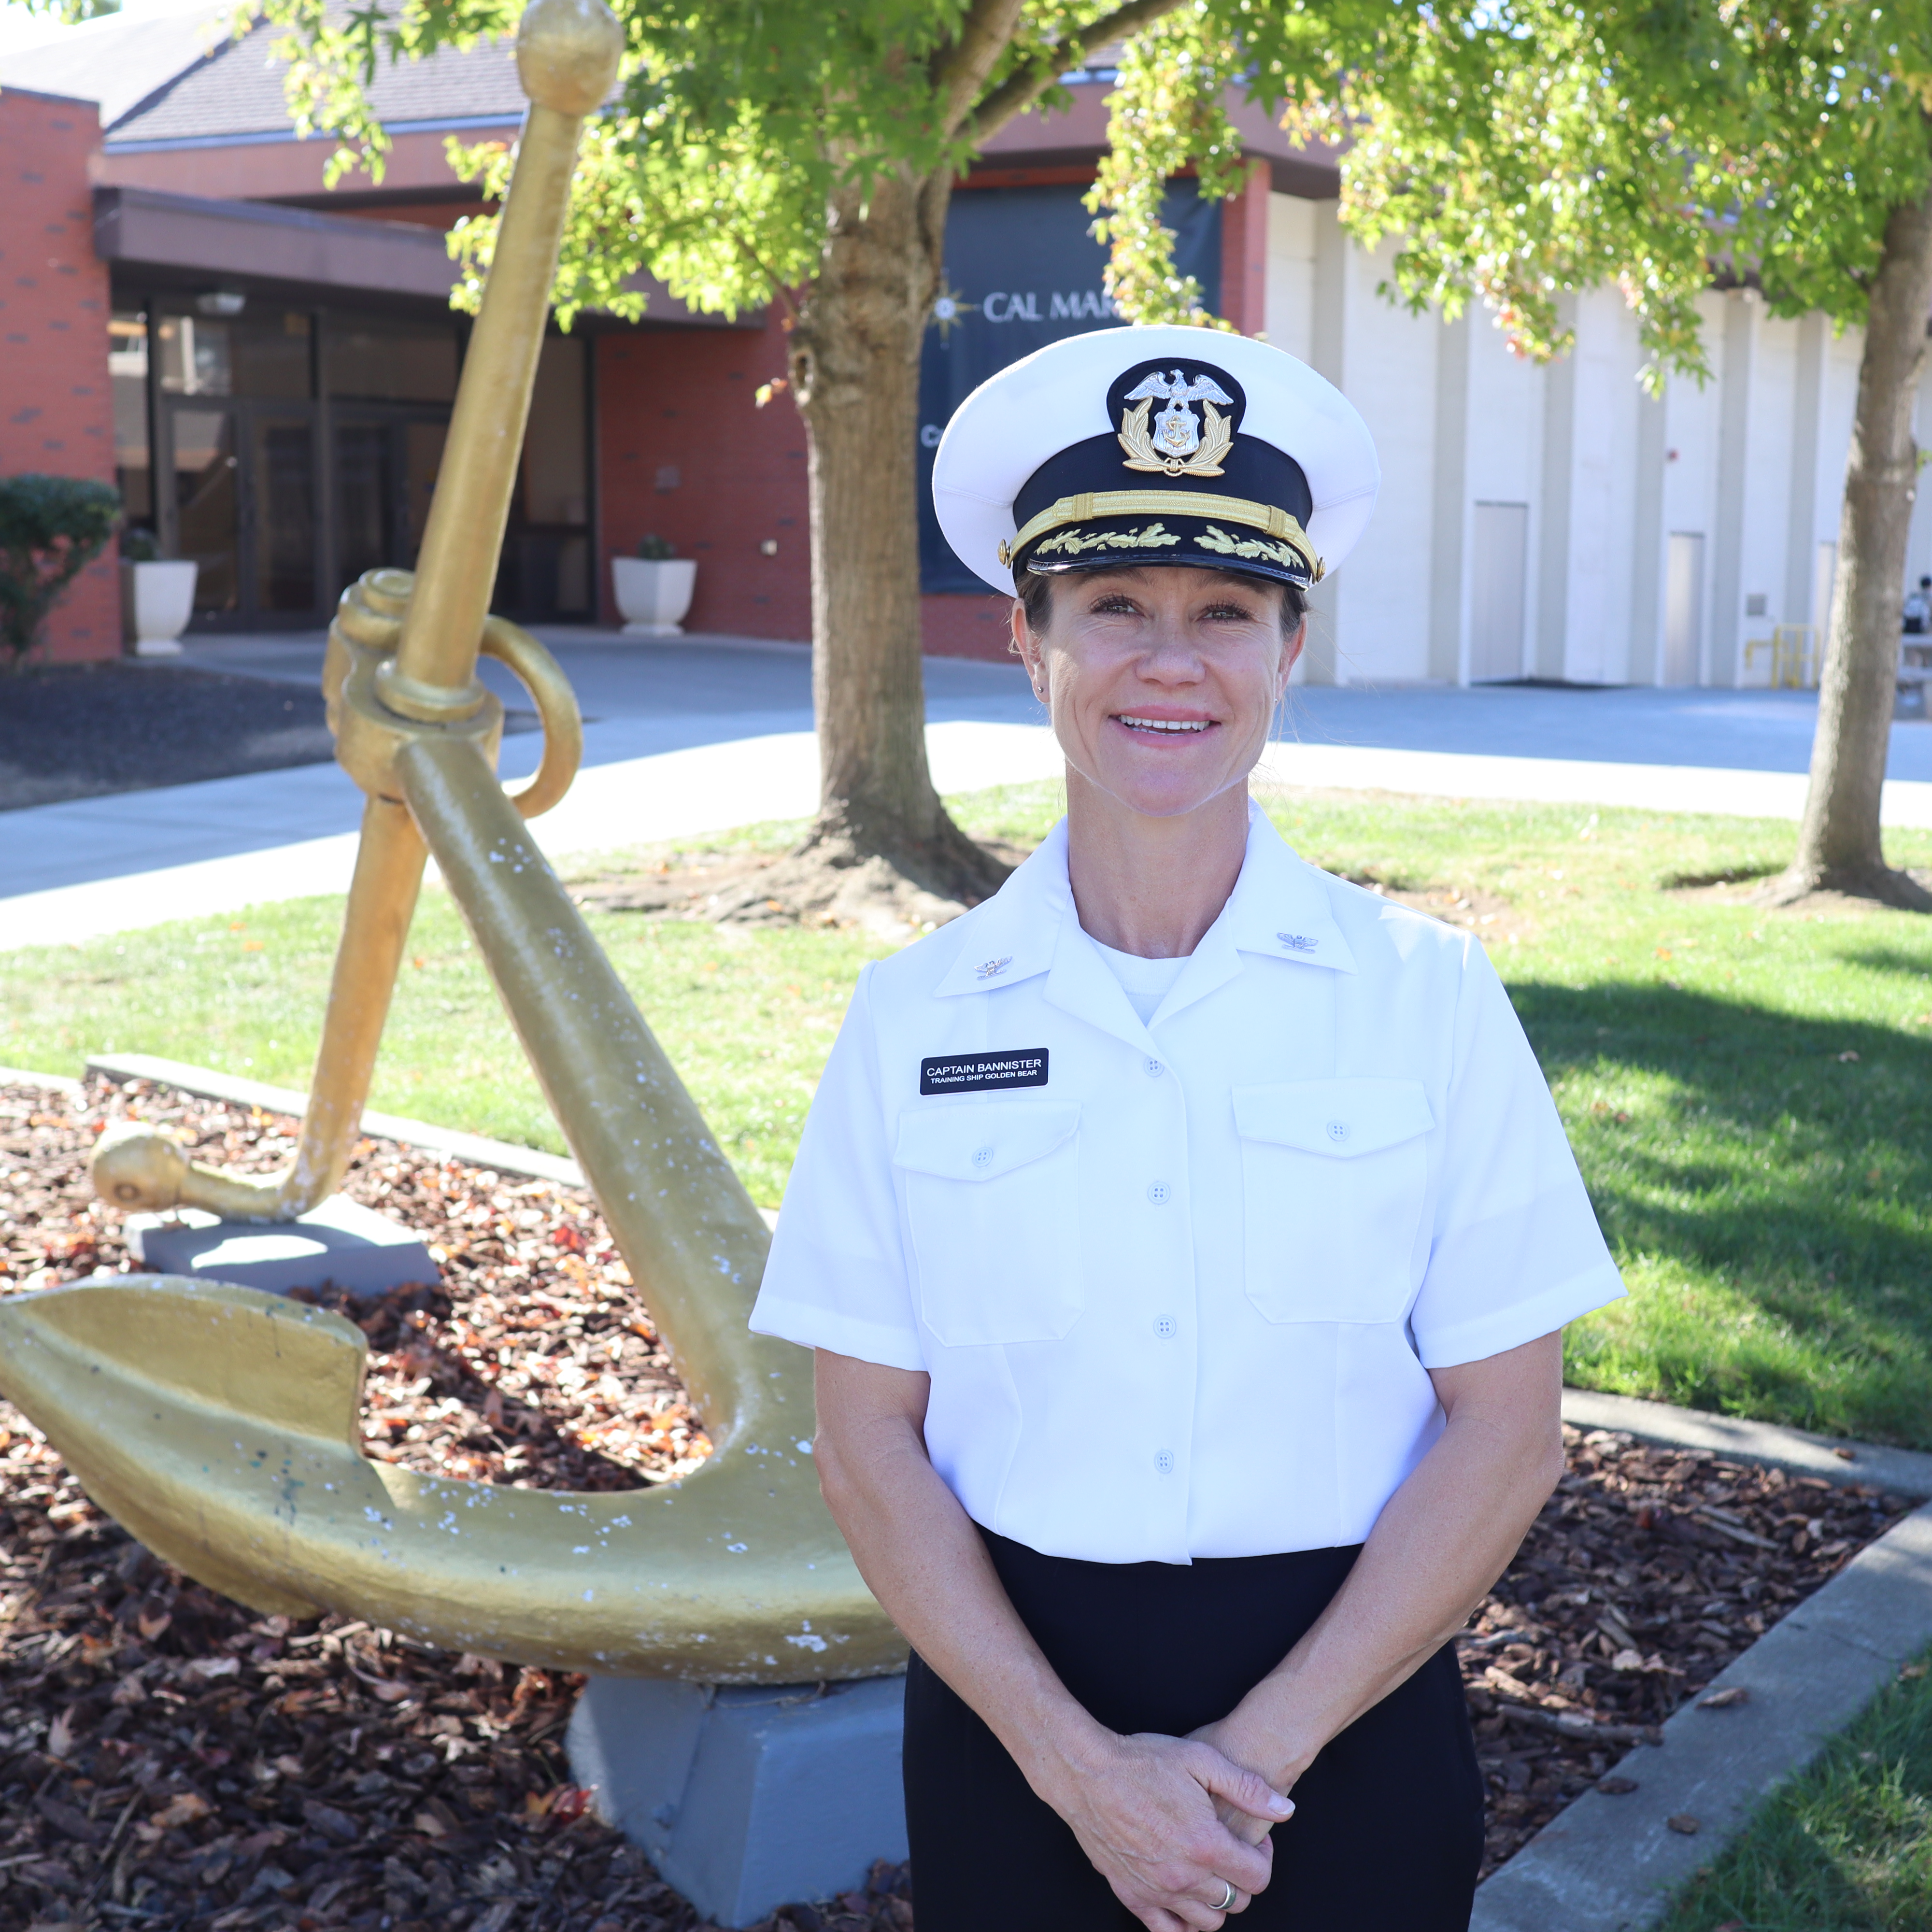 Cal Maritime Appoints its First Female Captain of Training Ship Golden Bear